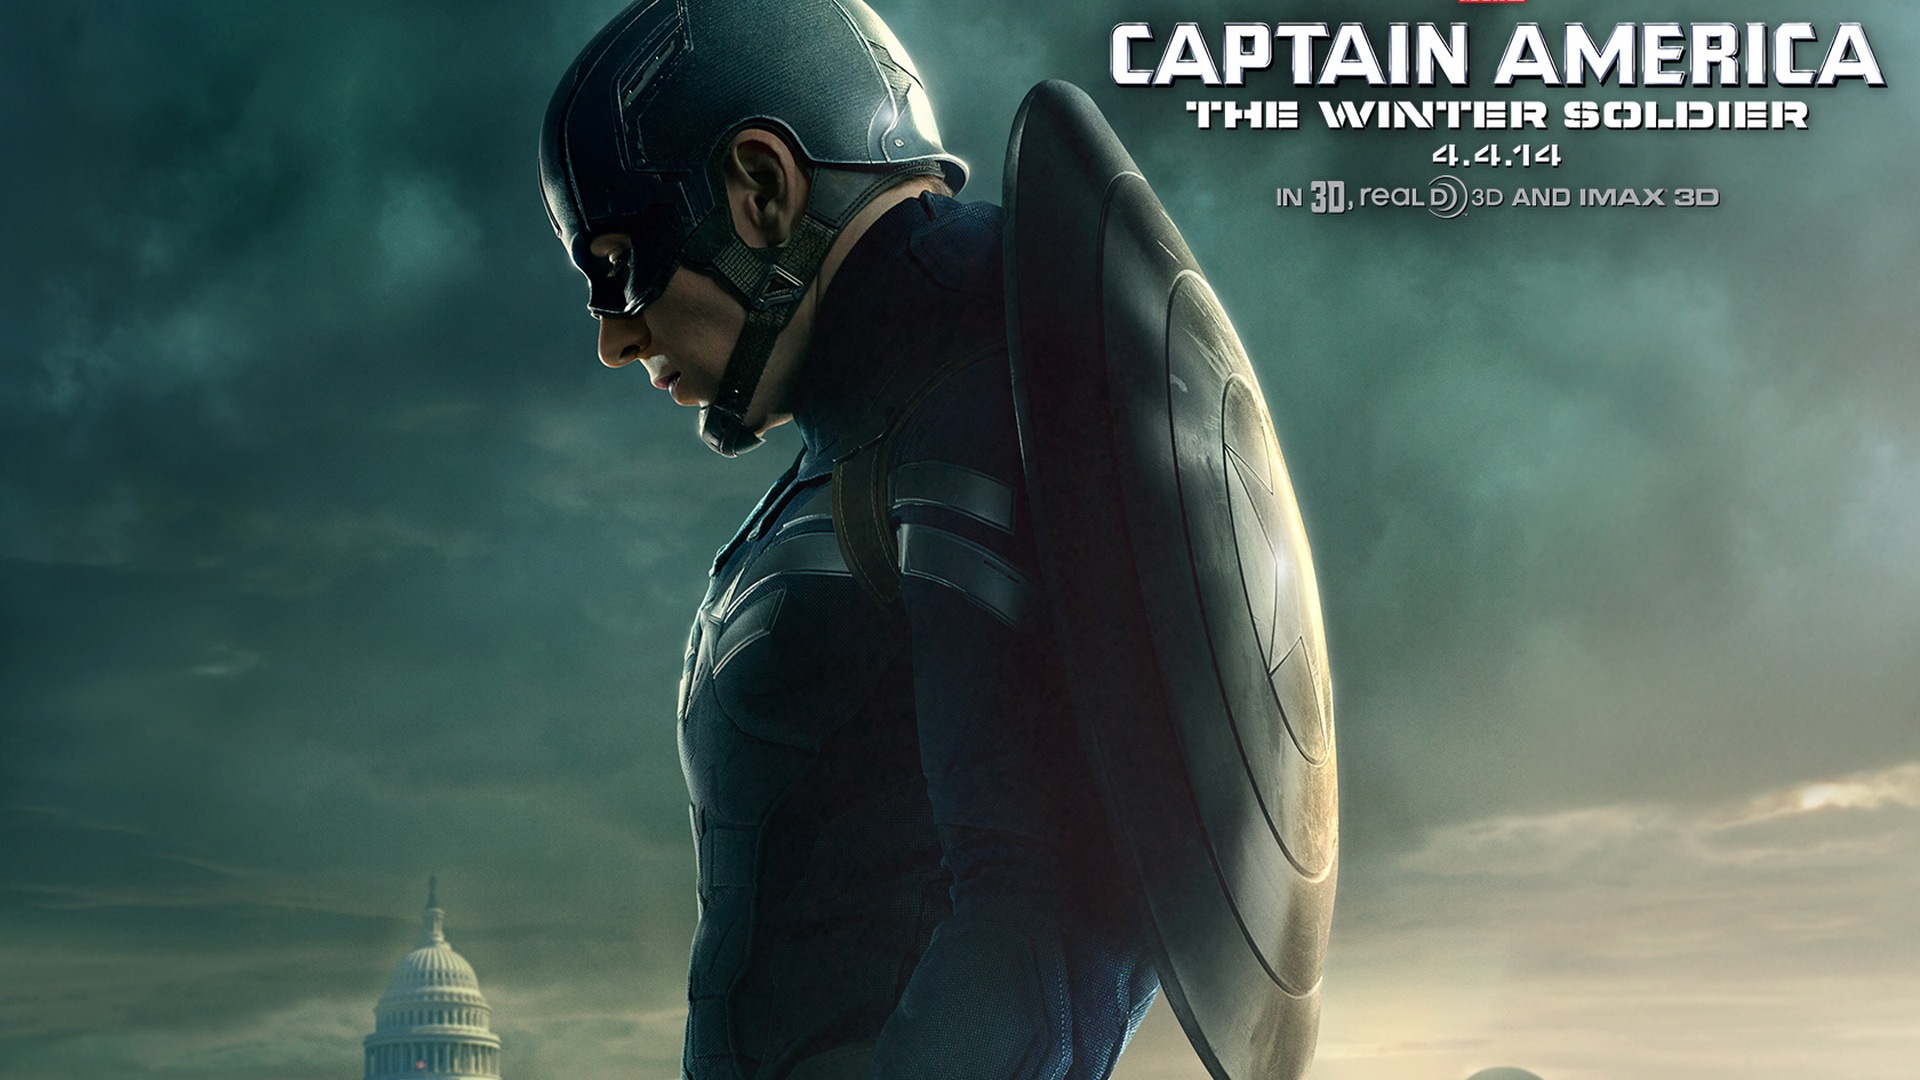 Captain America: The Winter Soldier HD tapety na plochu #7 - 1920x1080